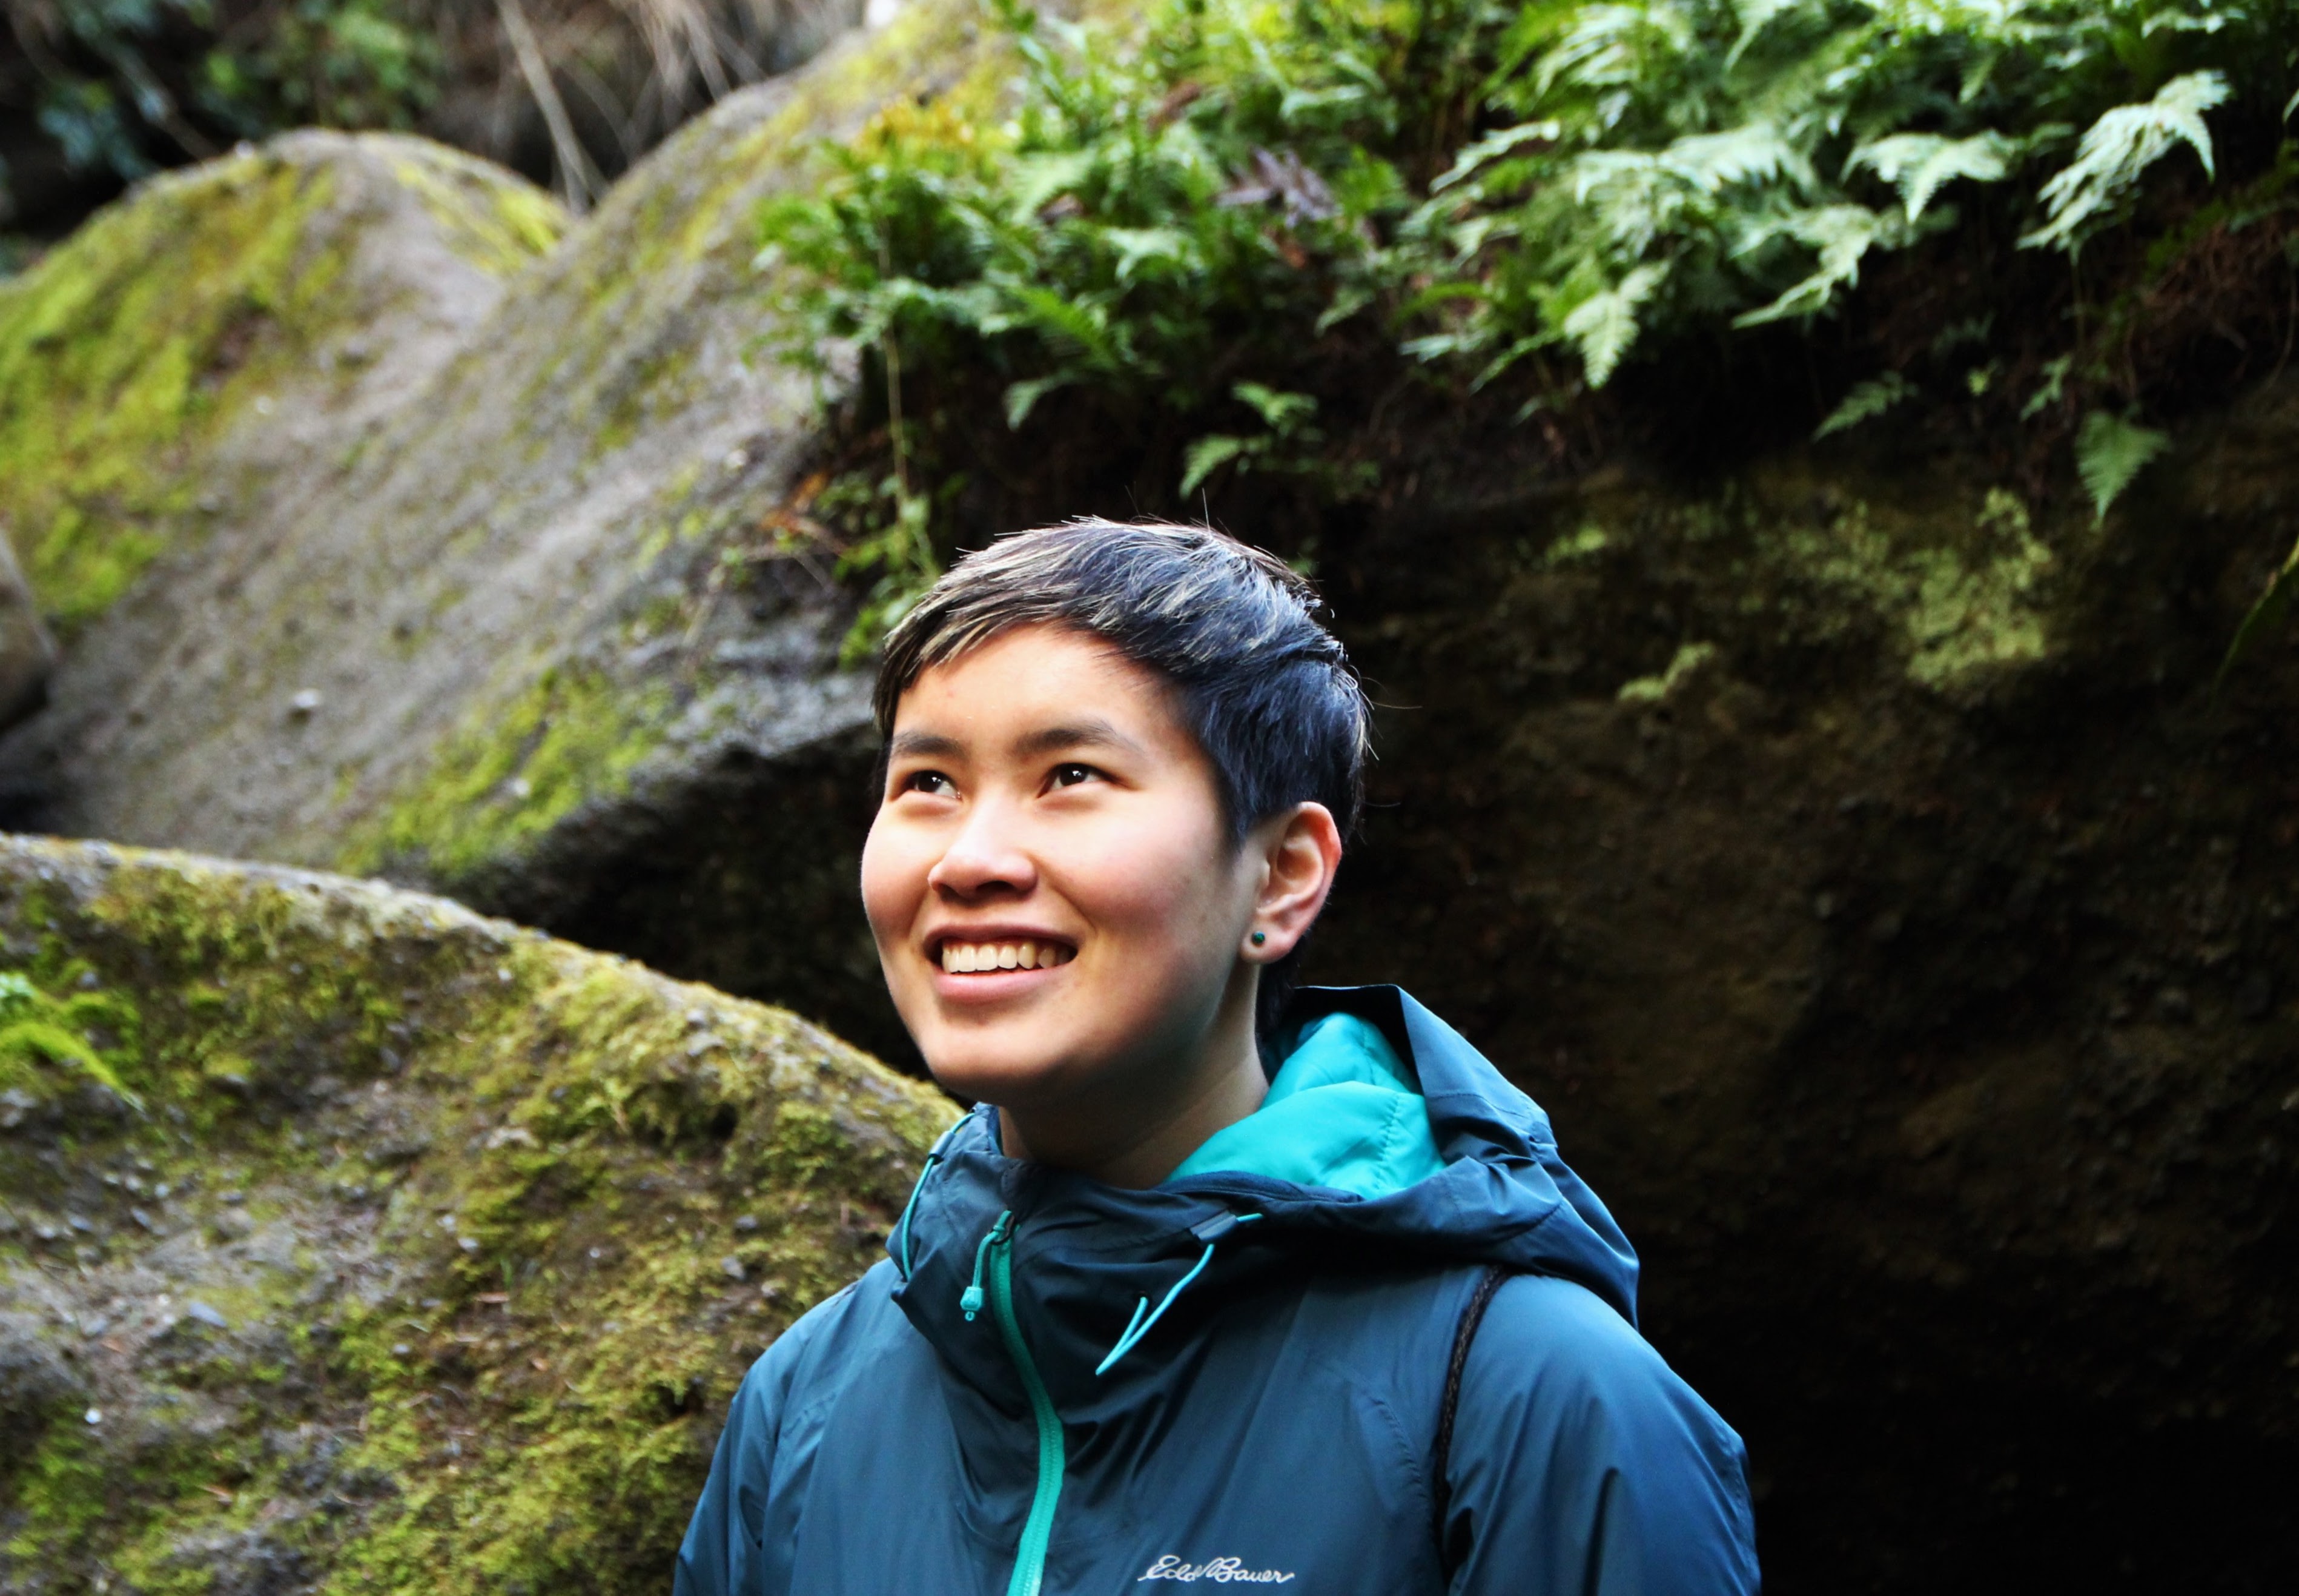 Young asian person (Katie) smiling while looking upward in front of large mossy rocks